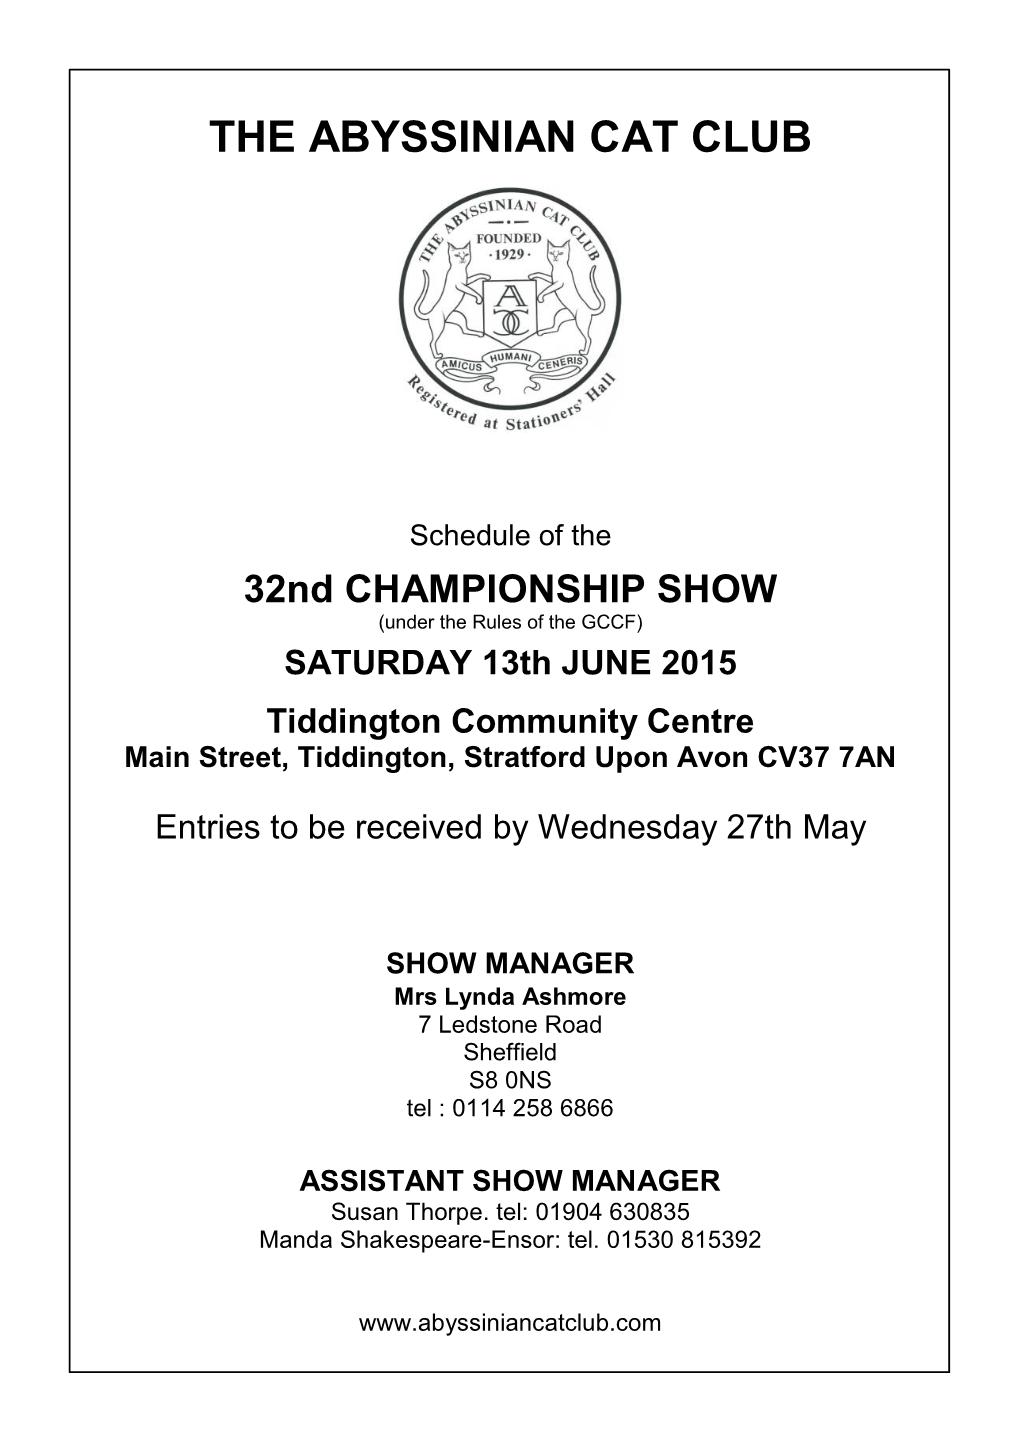 Schedule of the 32Nd CHAMPIONSHIP SHOW (Under the Rules of the GCCF) SATURDAY 13Th JUNE 2015